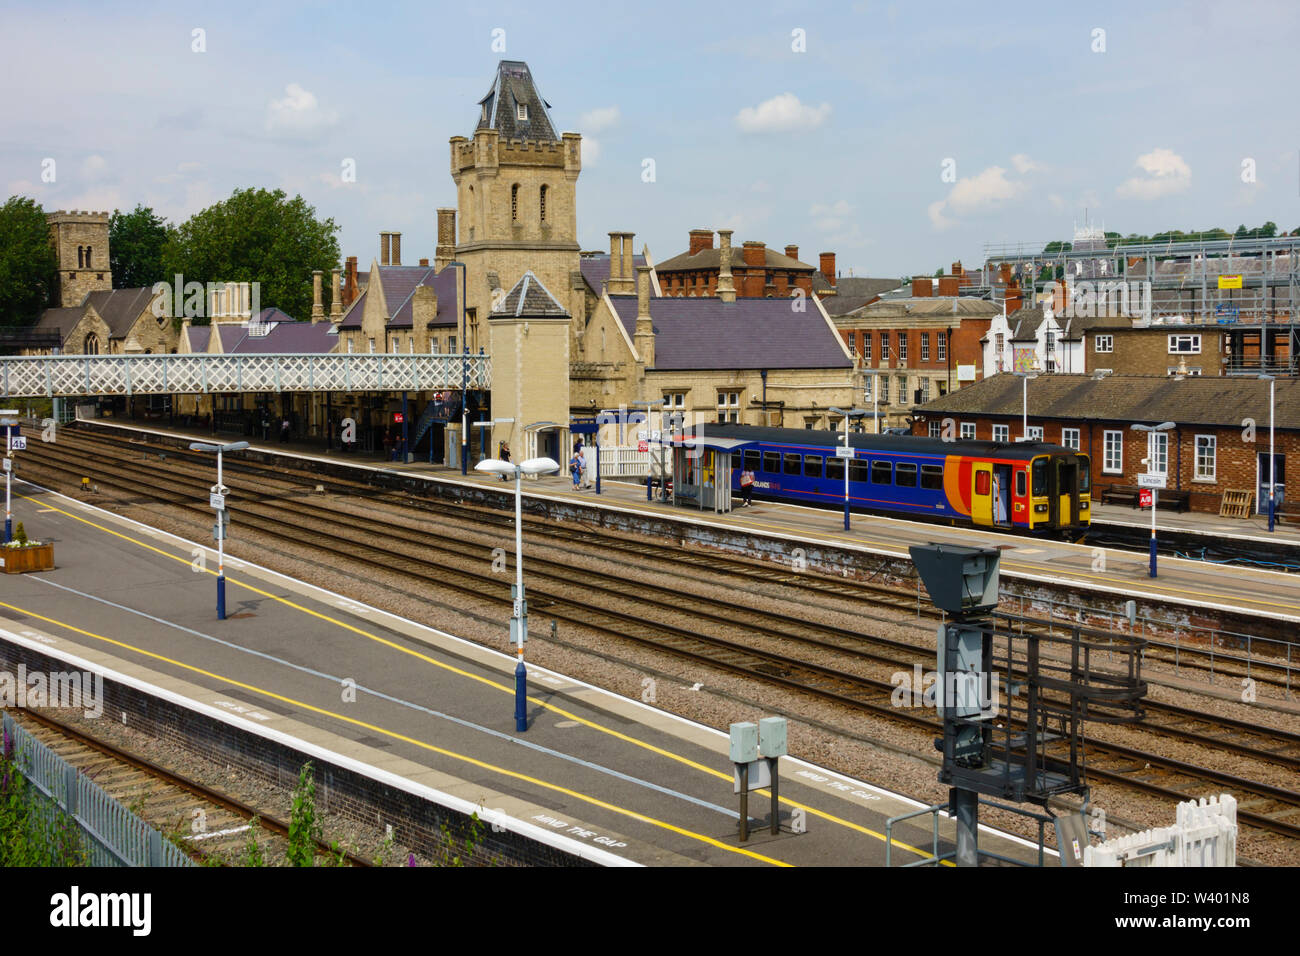 Lincoln Central railway station, Lincoln, Lincolnshire, England. July 2019 Stock Photo